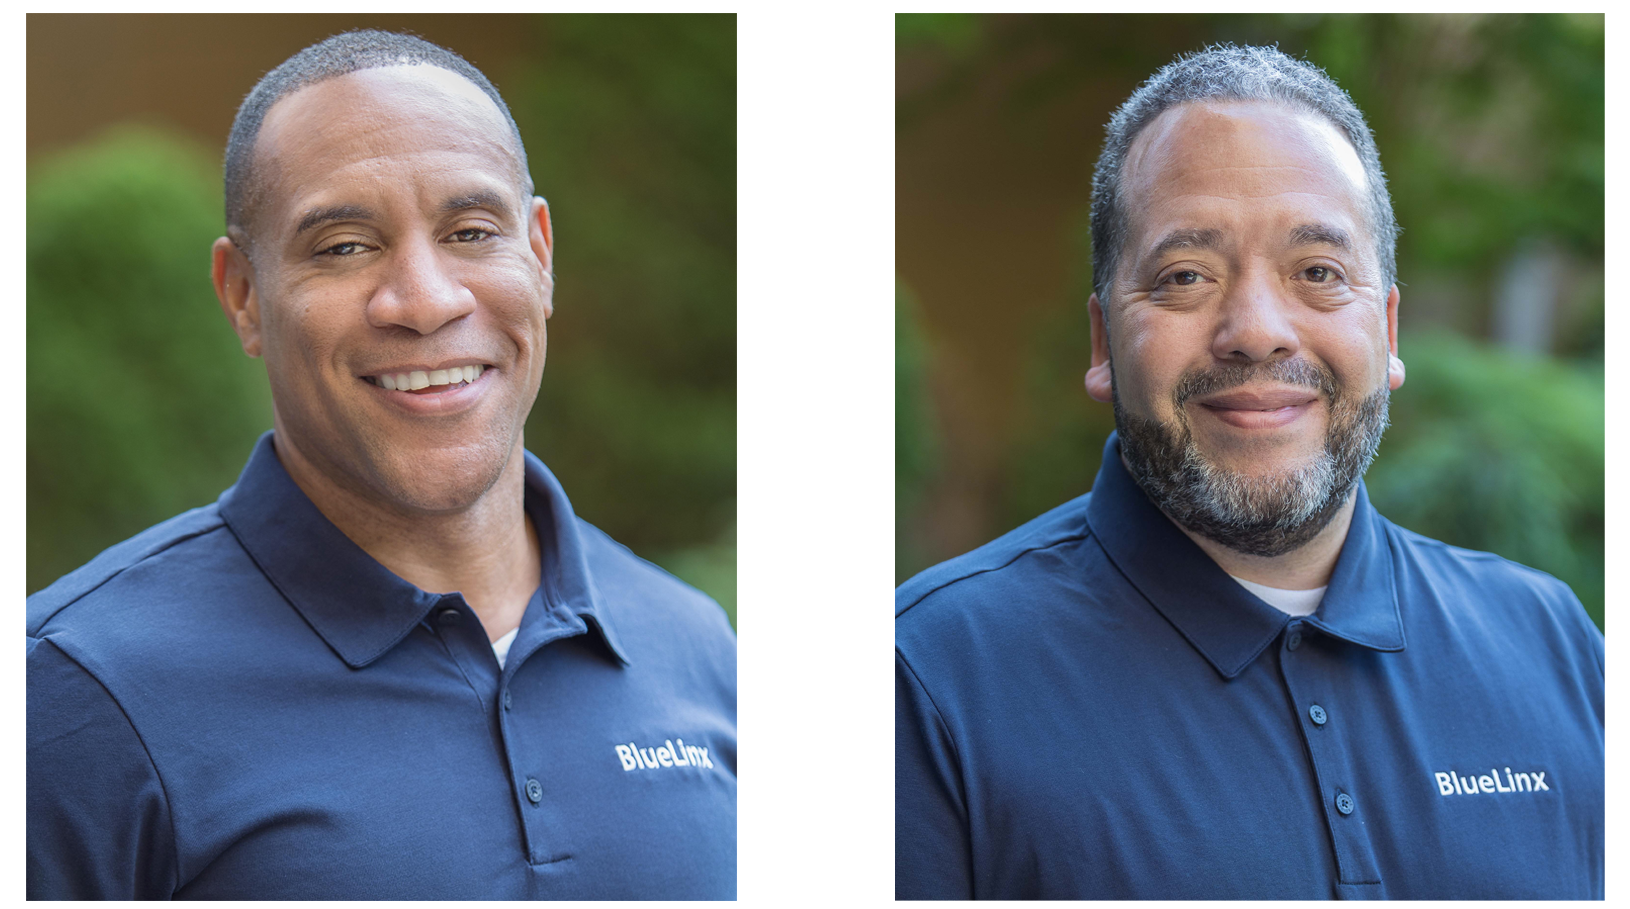 Two Executives from BlueLinx Holdings Inc. (NYSE: BXC) Featured as the Most Influential Black Executives in Corporate America